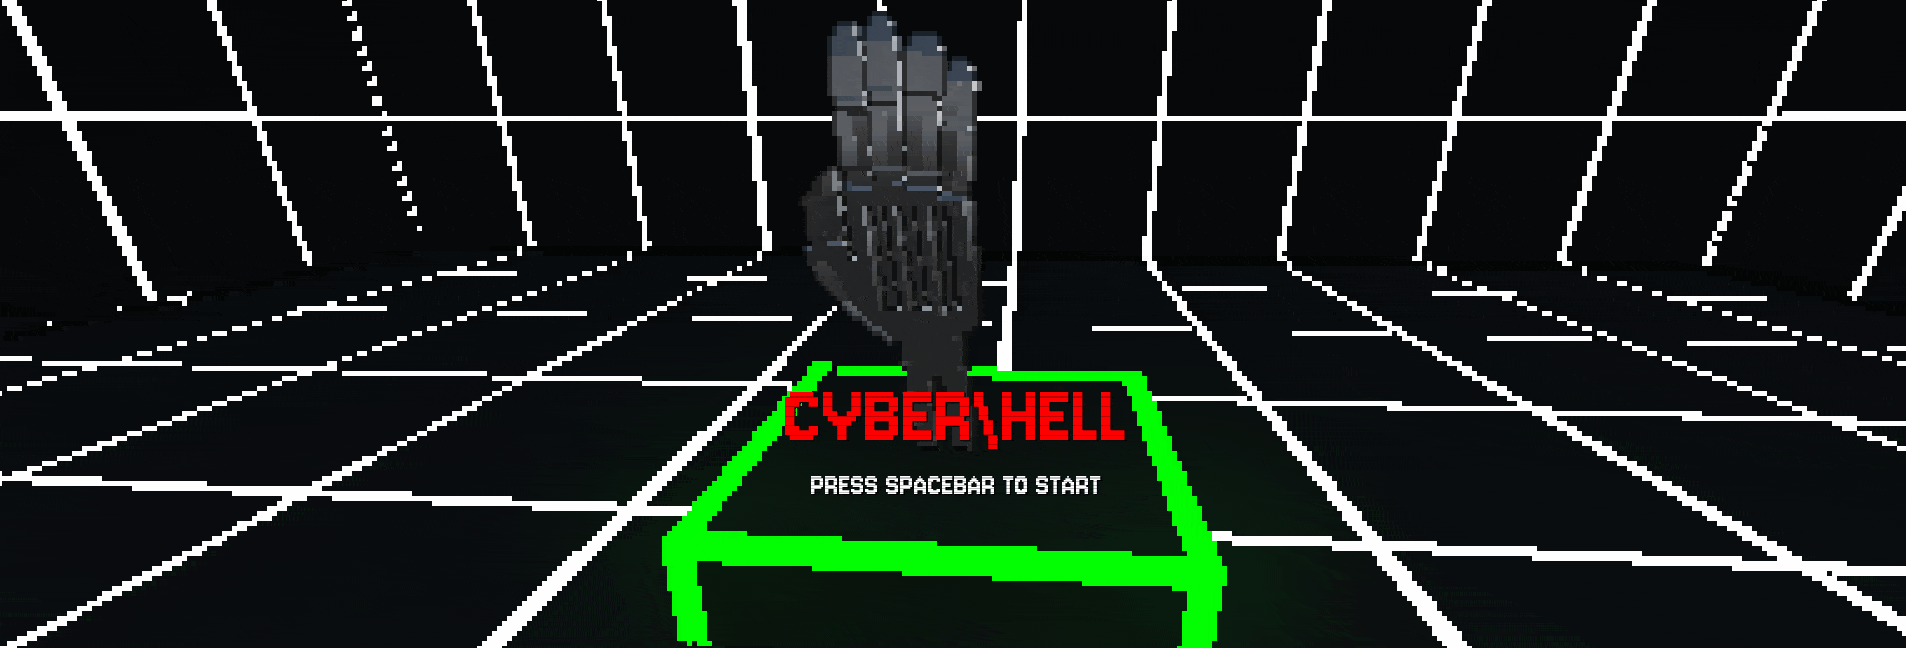 CYBER\HELL